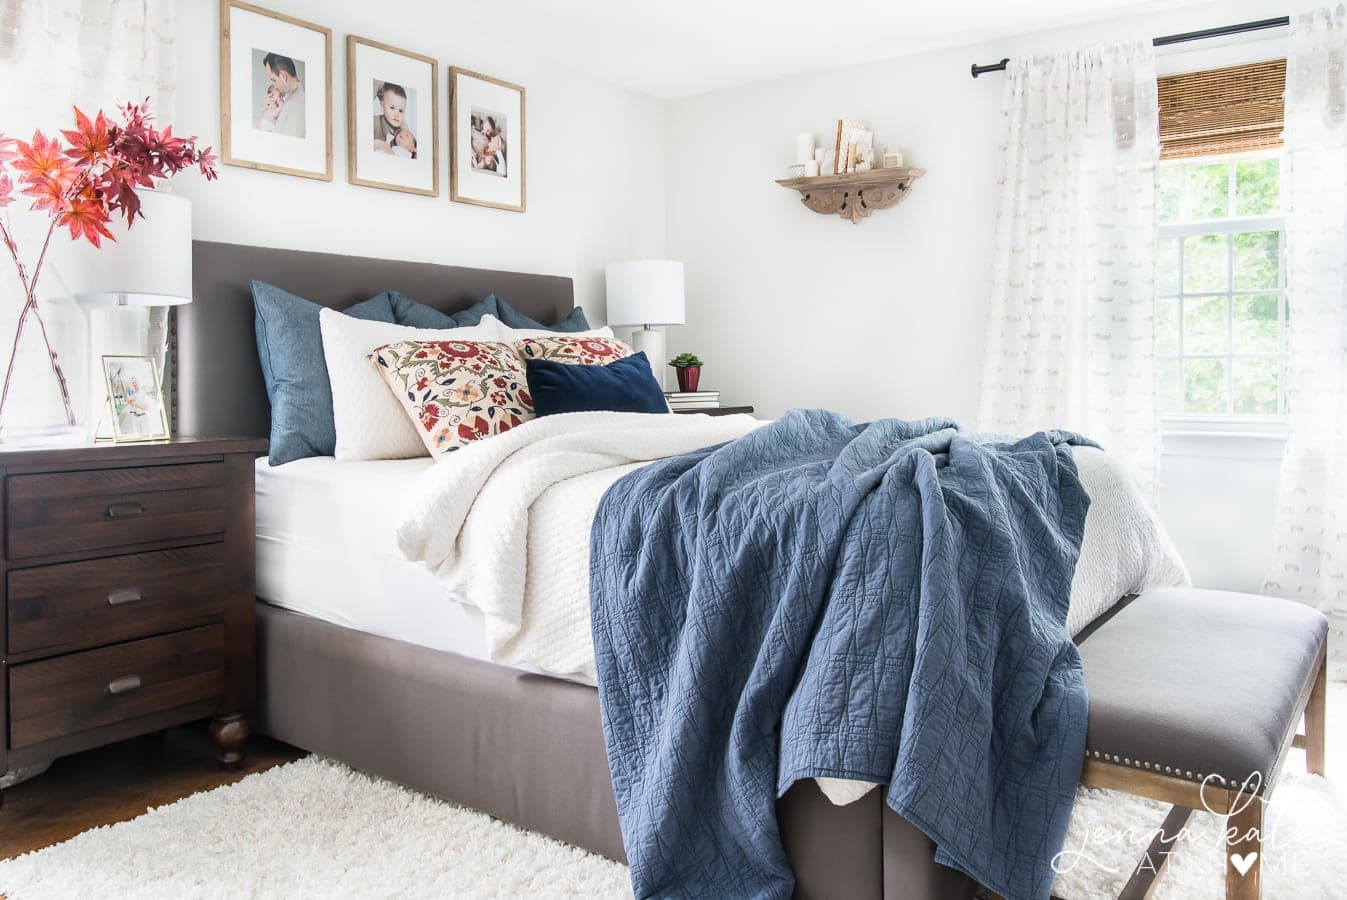 Create a cozy bedroom this fall with these simple decorating ideas